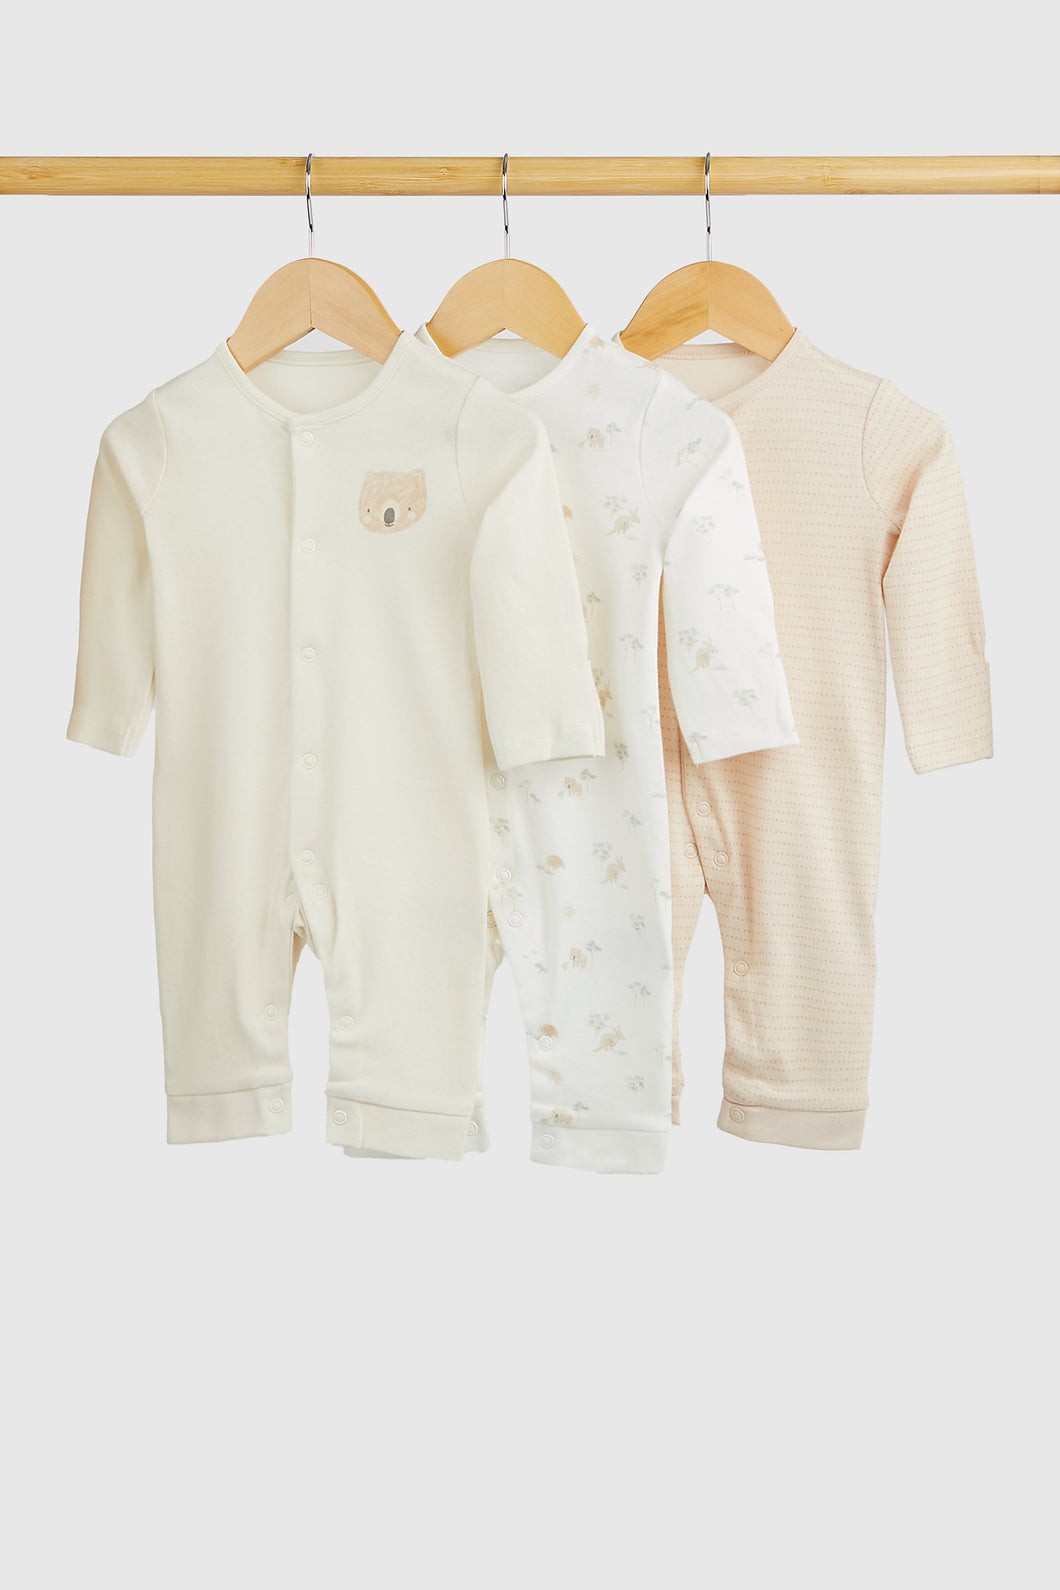 Mothercare My First Footless Sleepsuits - 3 Pack